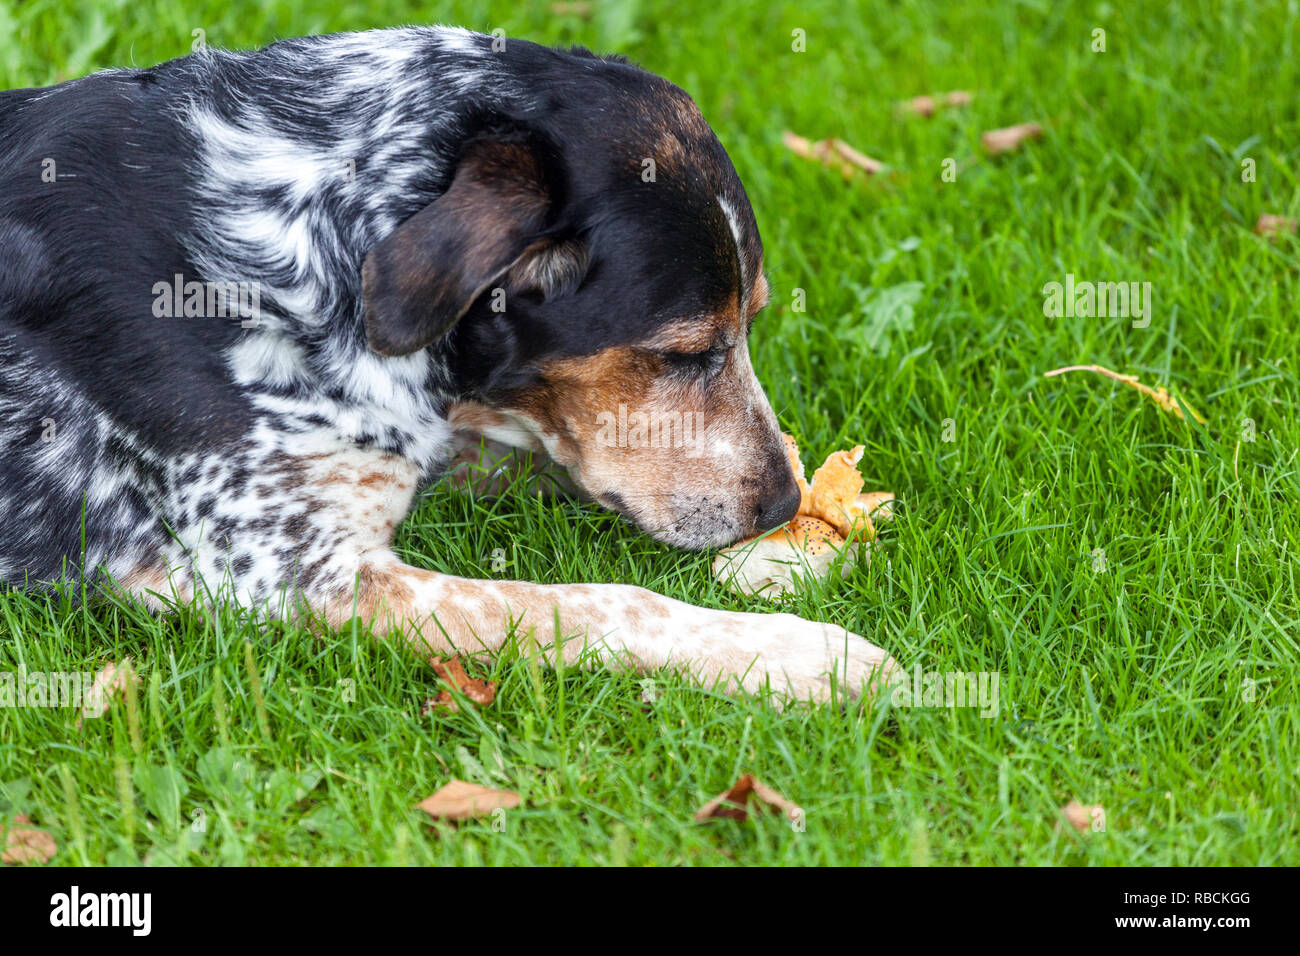 Czech breed Bohemian Spotted Dog sniffing, dog in garden no people Stock Photo